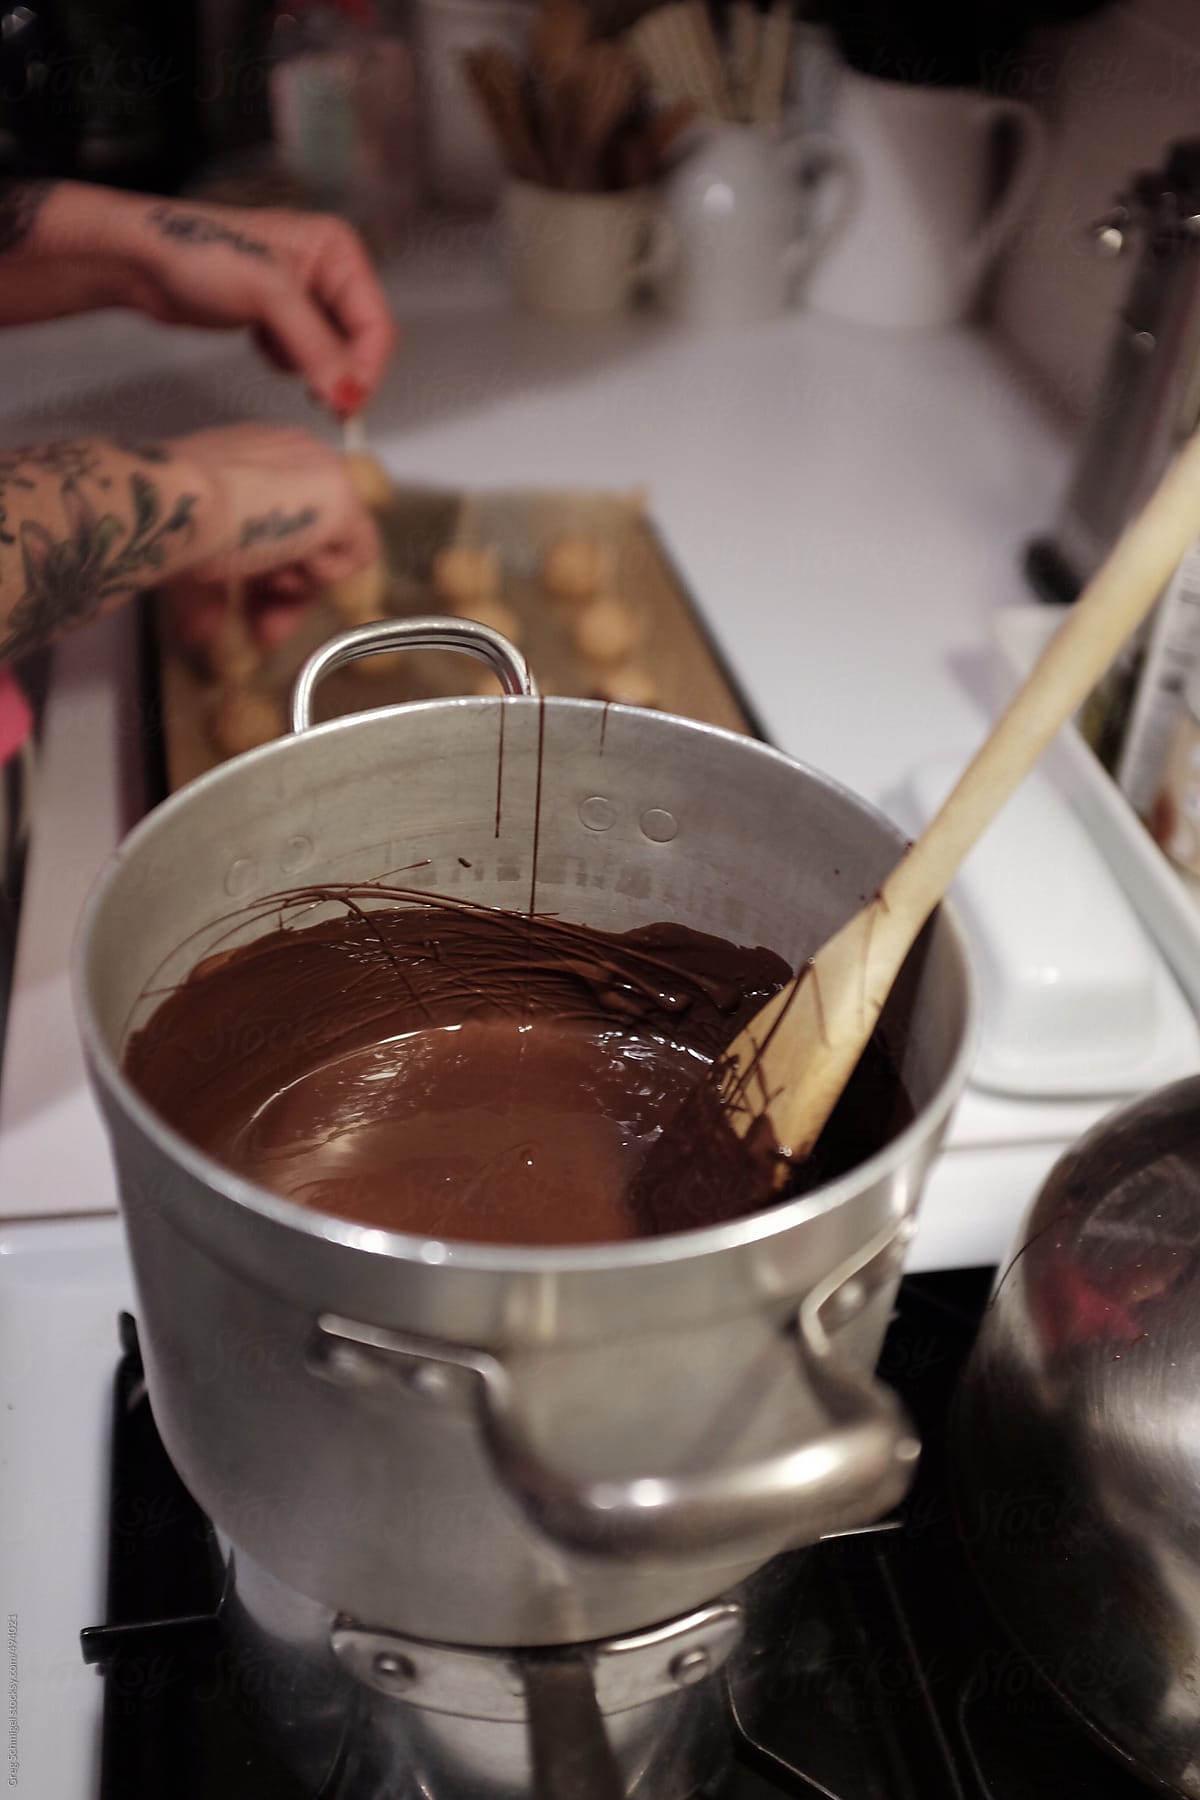 A woman with tattoos on her hands baking chocolate covered desserts in the kitchen